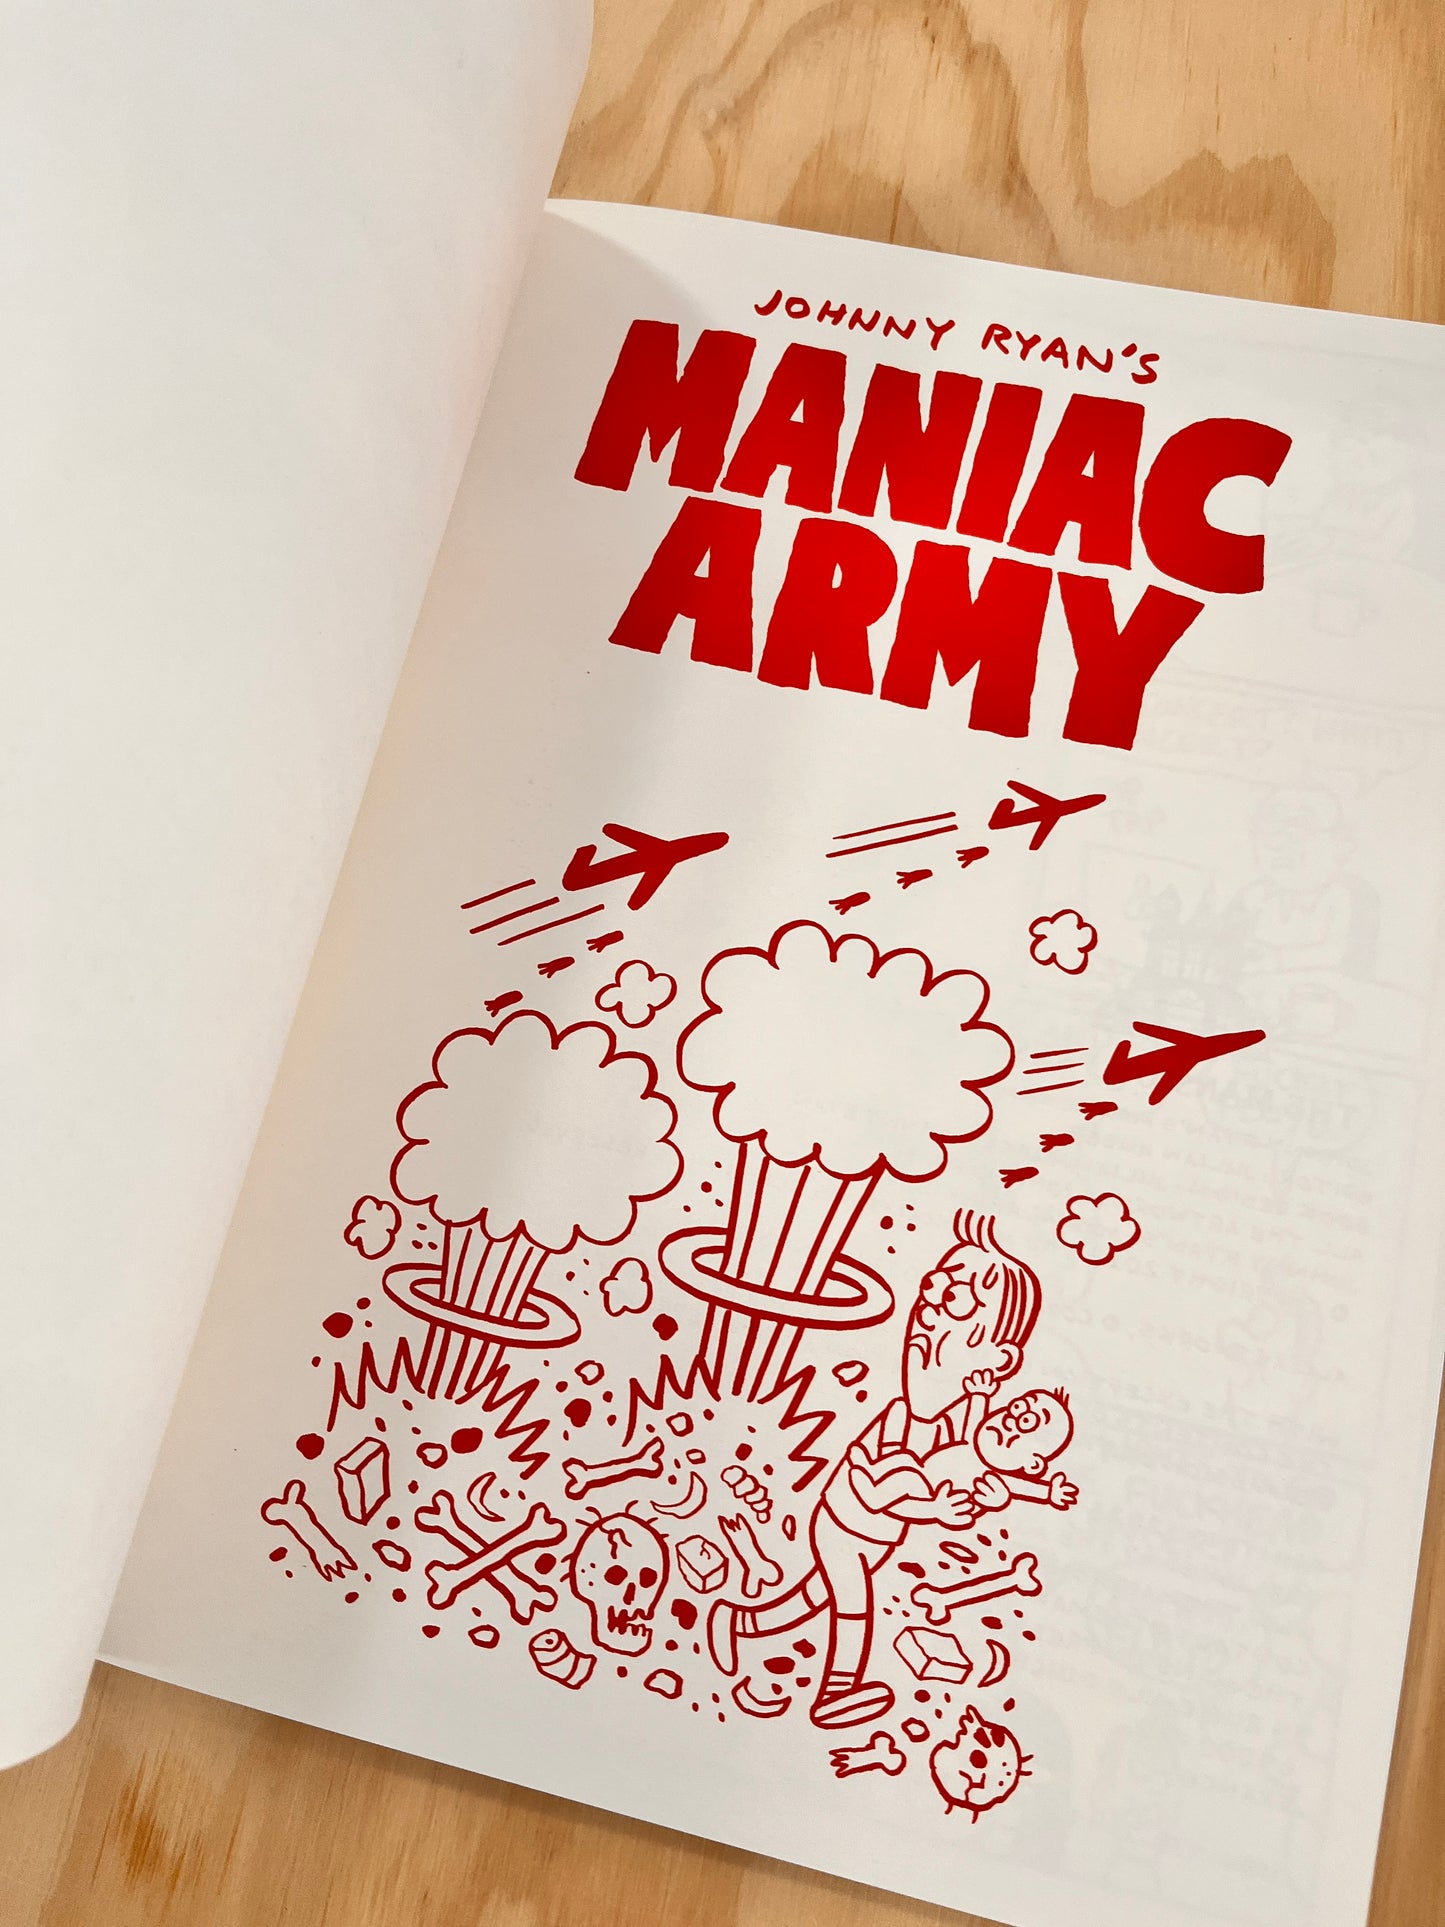 A tale of Terror issue two : MANIAC ARMY